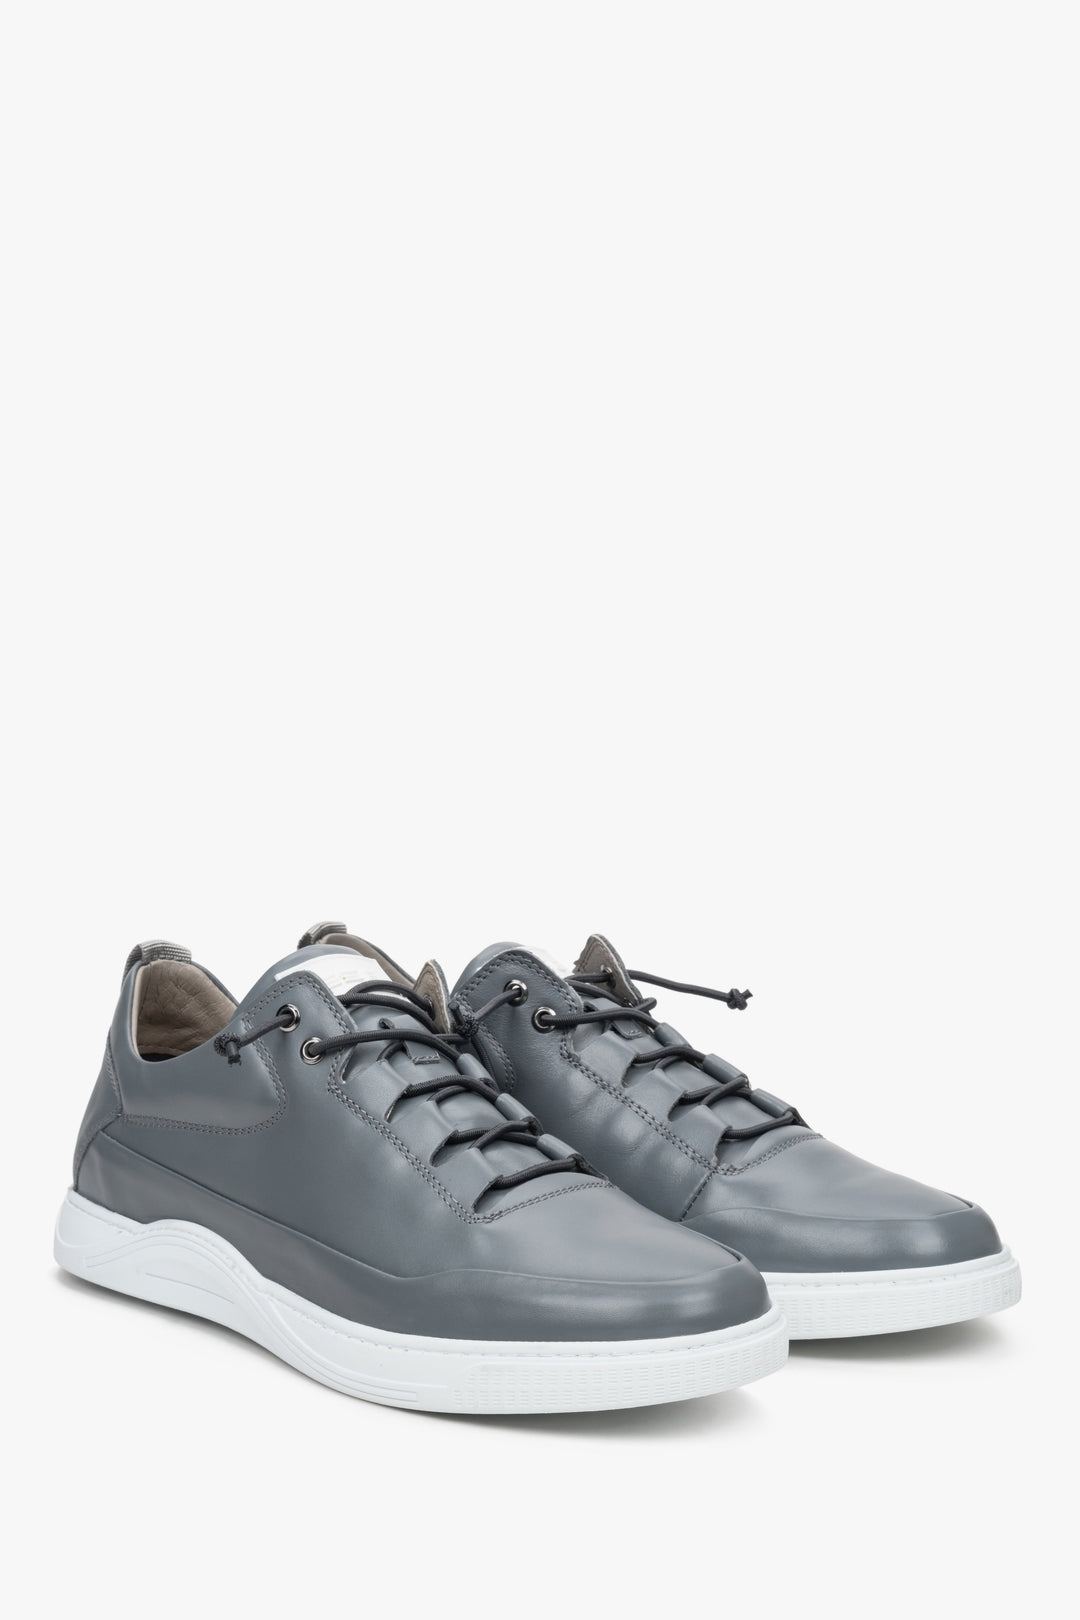 Men's grey spring and fall sneakers ES 8 made of genuine leather - close-up on the sole and the toe of the shoe.